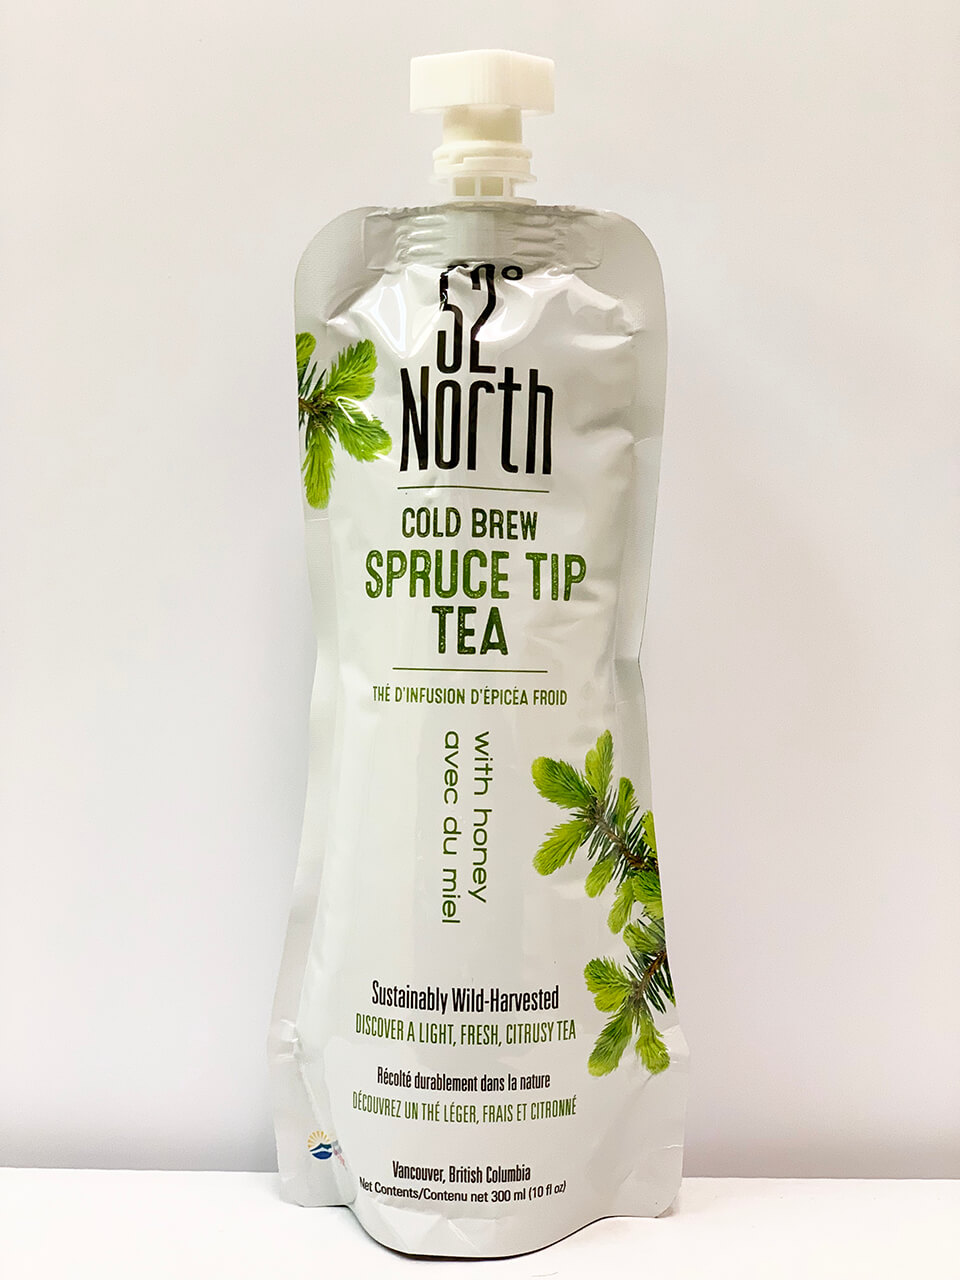 Tetra bag with twist cap and Fifty-Two Degrees North label reading "Spruce Tip Tea".